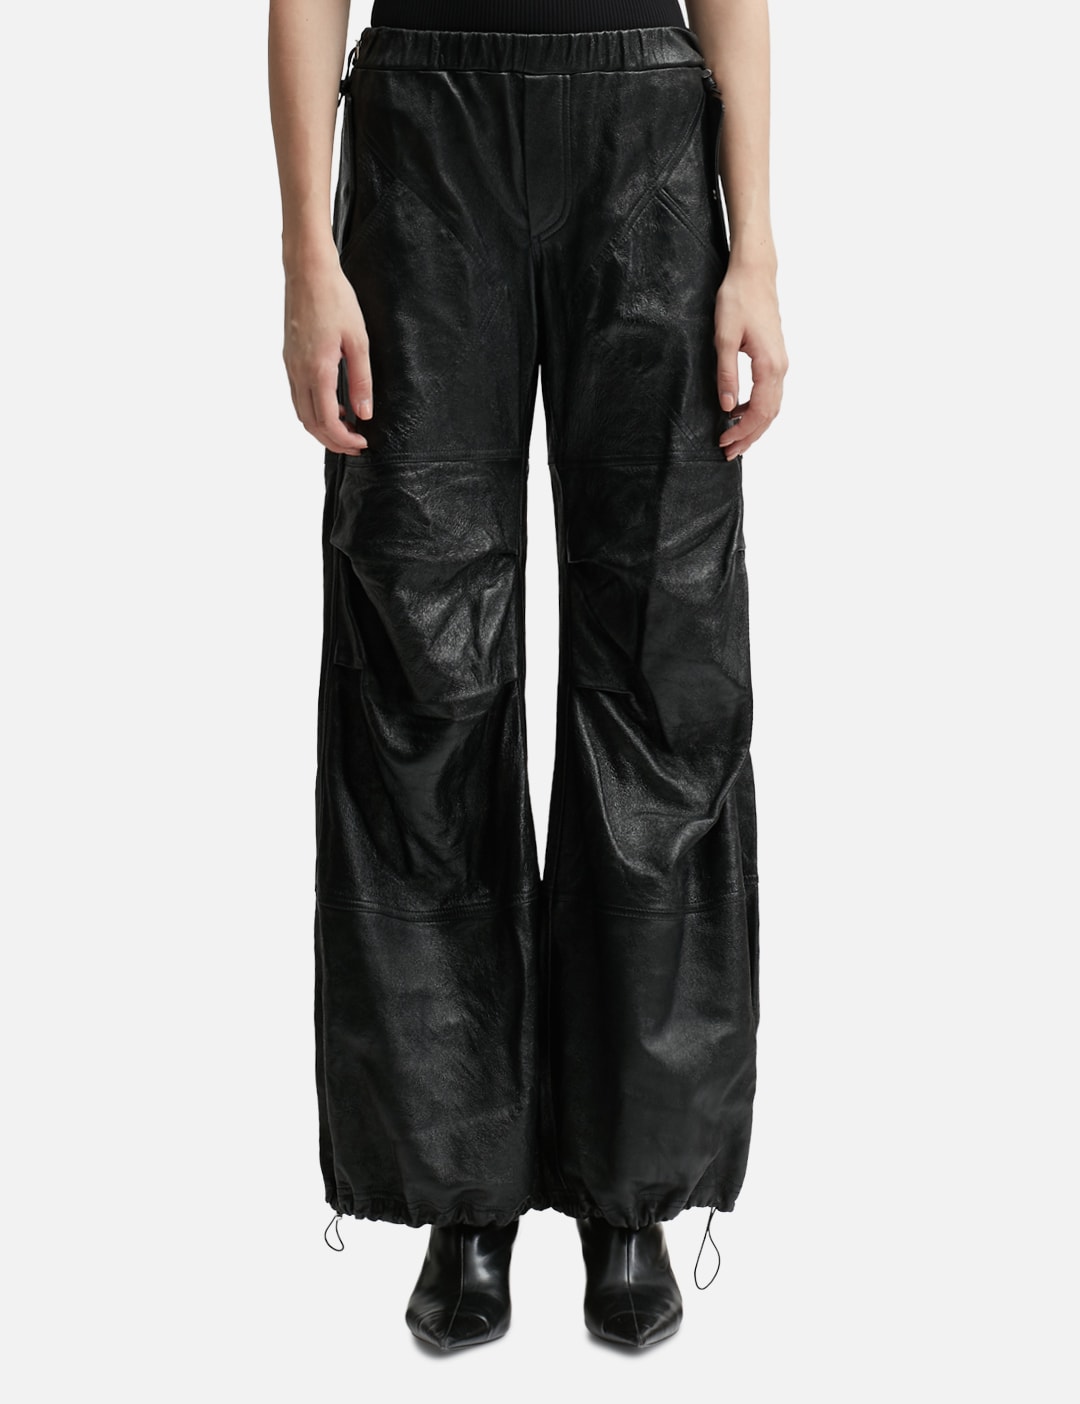 ANDREĀDAMO - WET LEATHER CARGO PANTS | HBX - Globally Curated Fashion ...